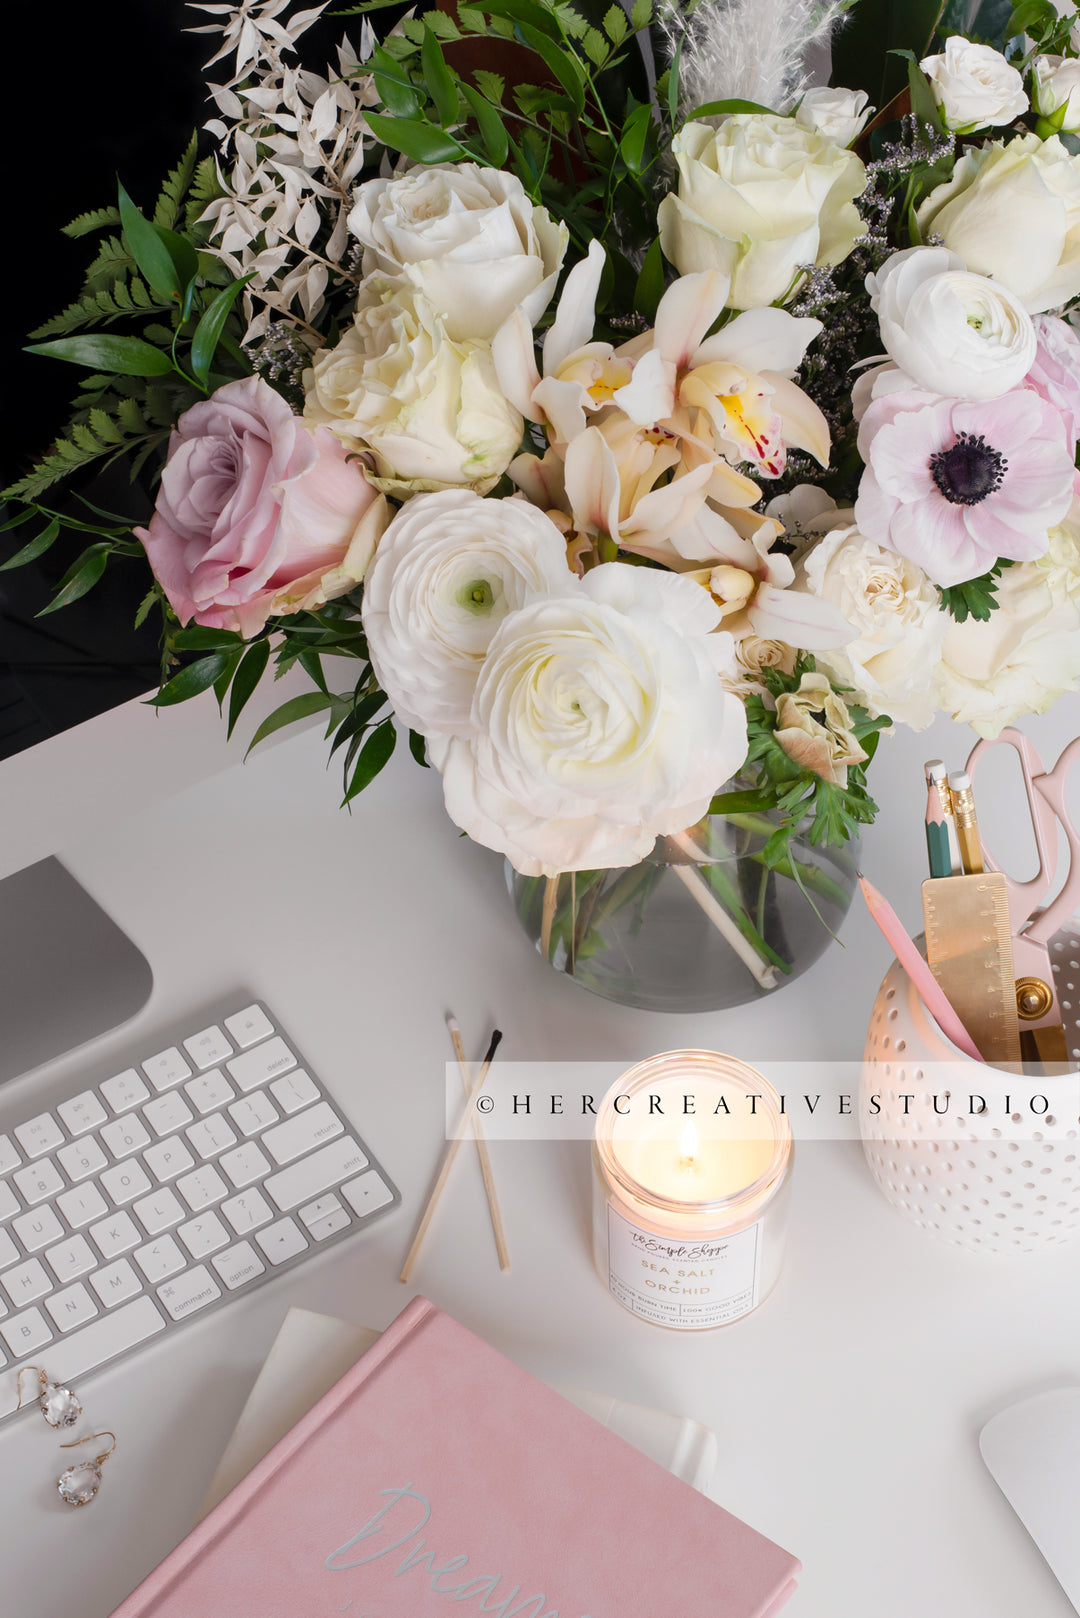 Flowers & Candle on Pretty Workspace, Styled Stock Image